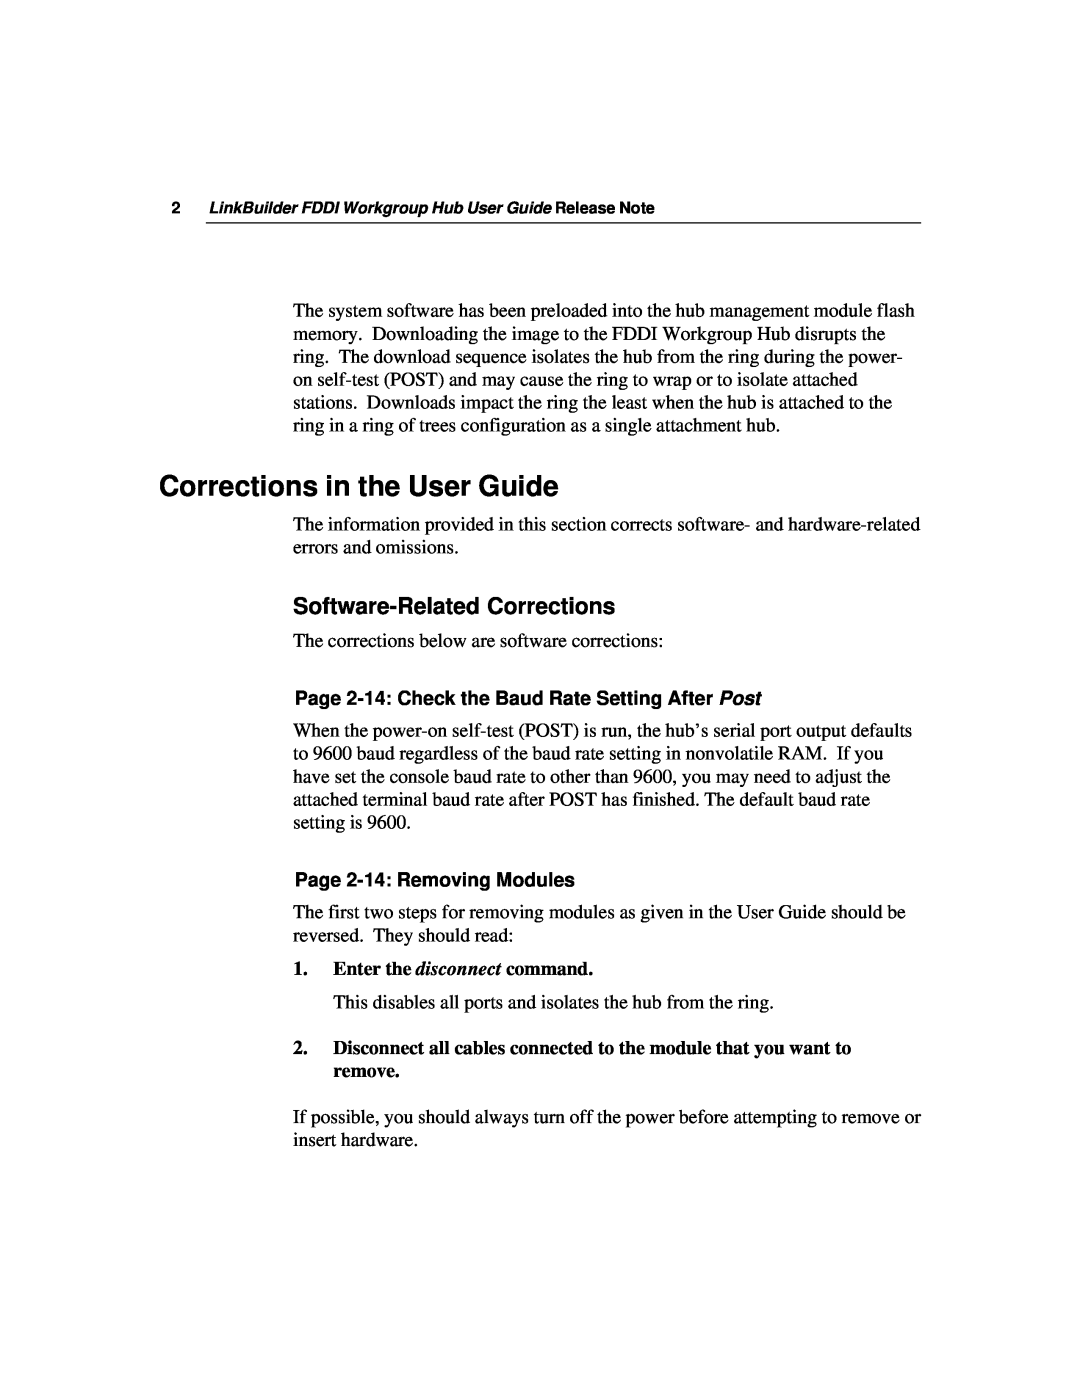 3Com 09-0487-002 manual Corrections in the User Guide, Software-Related Corrections, Page 2-14 Removing Modules 